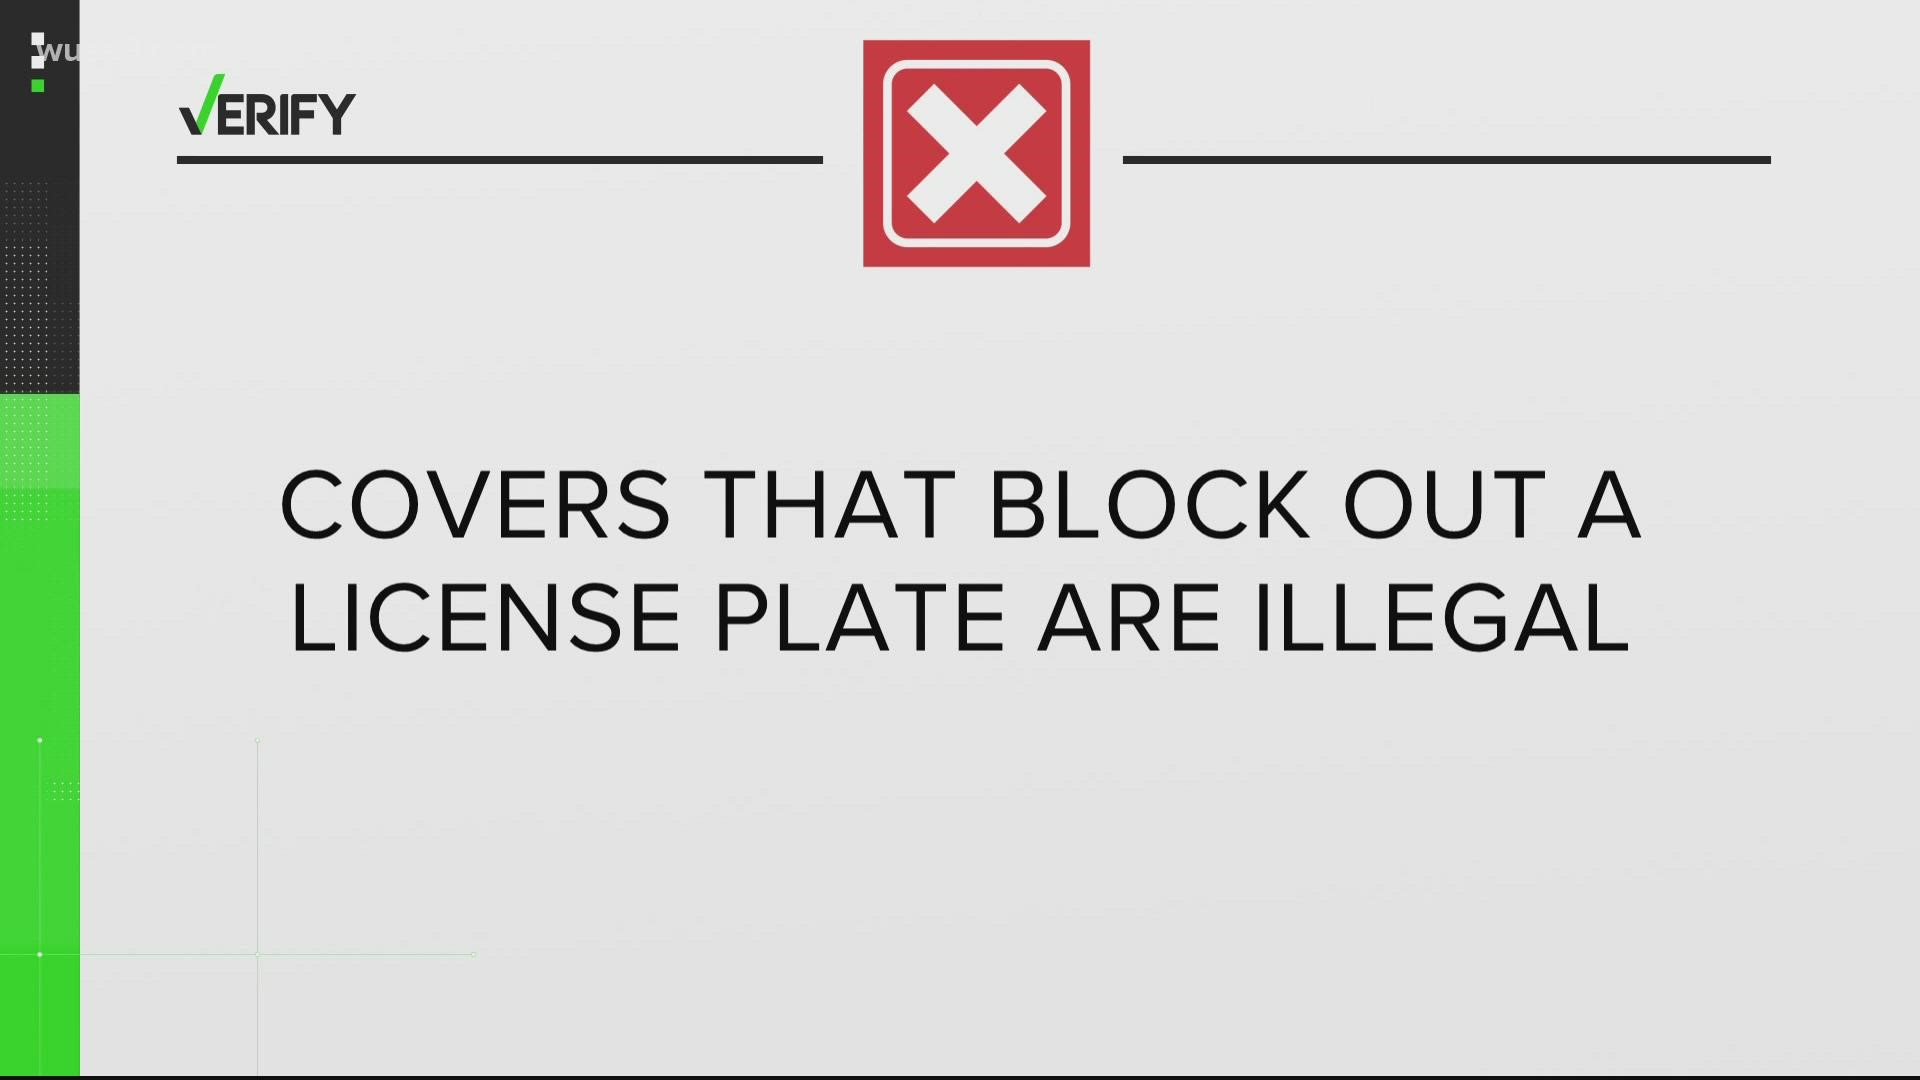 We verify whether you can cover your license plate when driving. Spoiler alert - don't do it.